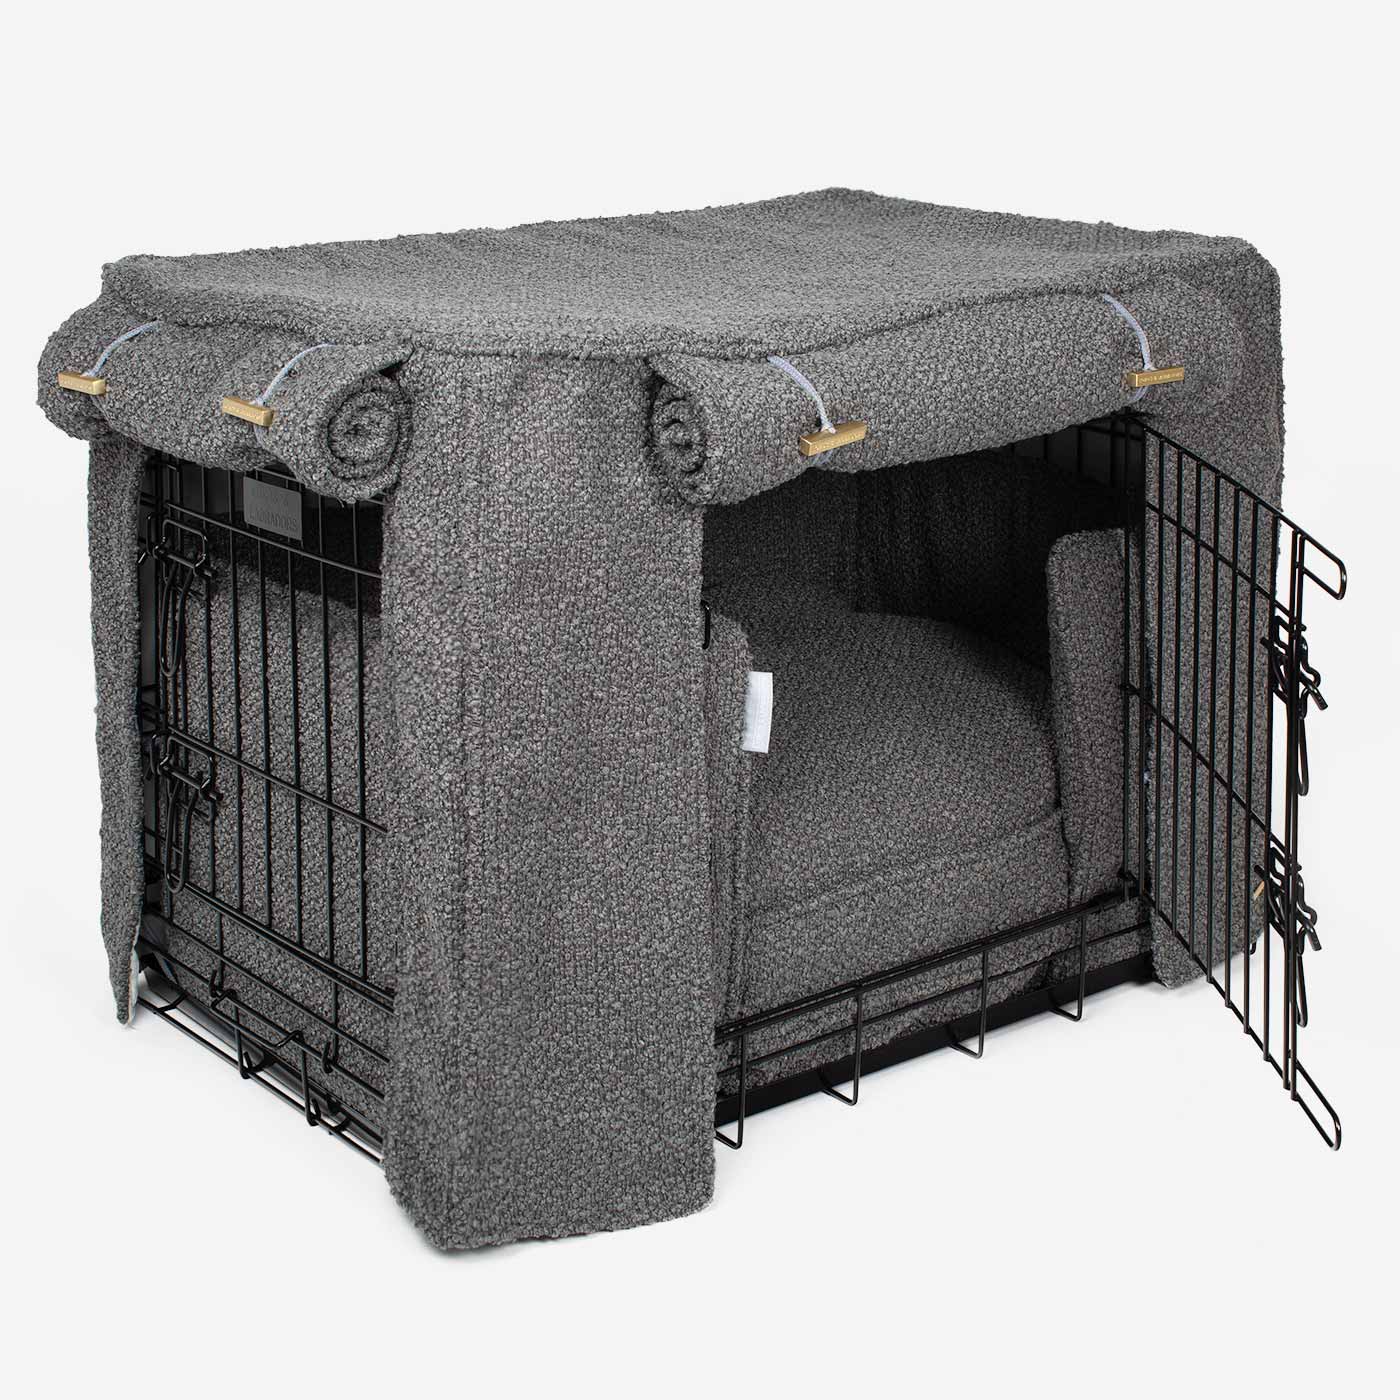 [color:black] Luxury Heavy Duty Dog Cage, In Stunning Granite Bouclé Cage Set, The Perfect Dog Cage Set For Building The Ultimate Pet Den! Dog Cage Cover Available To Personalize at Lords & Labradors US